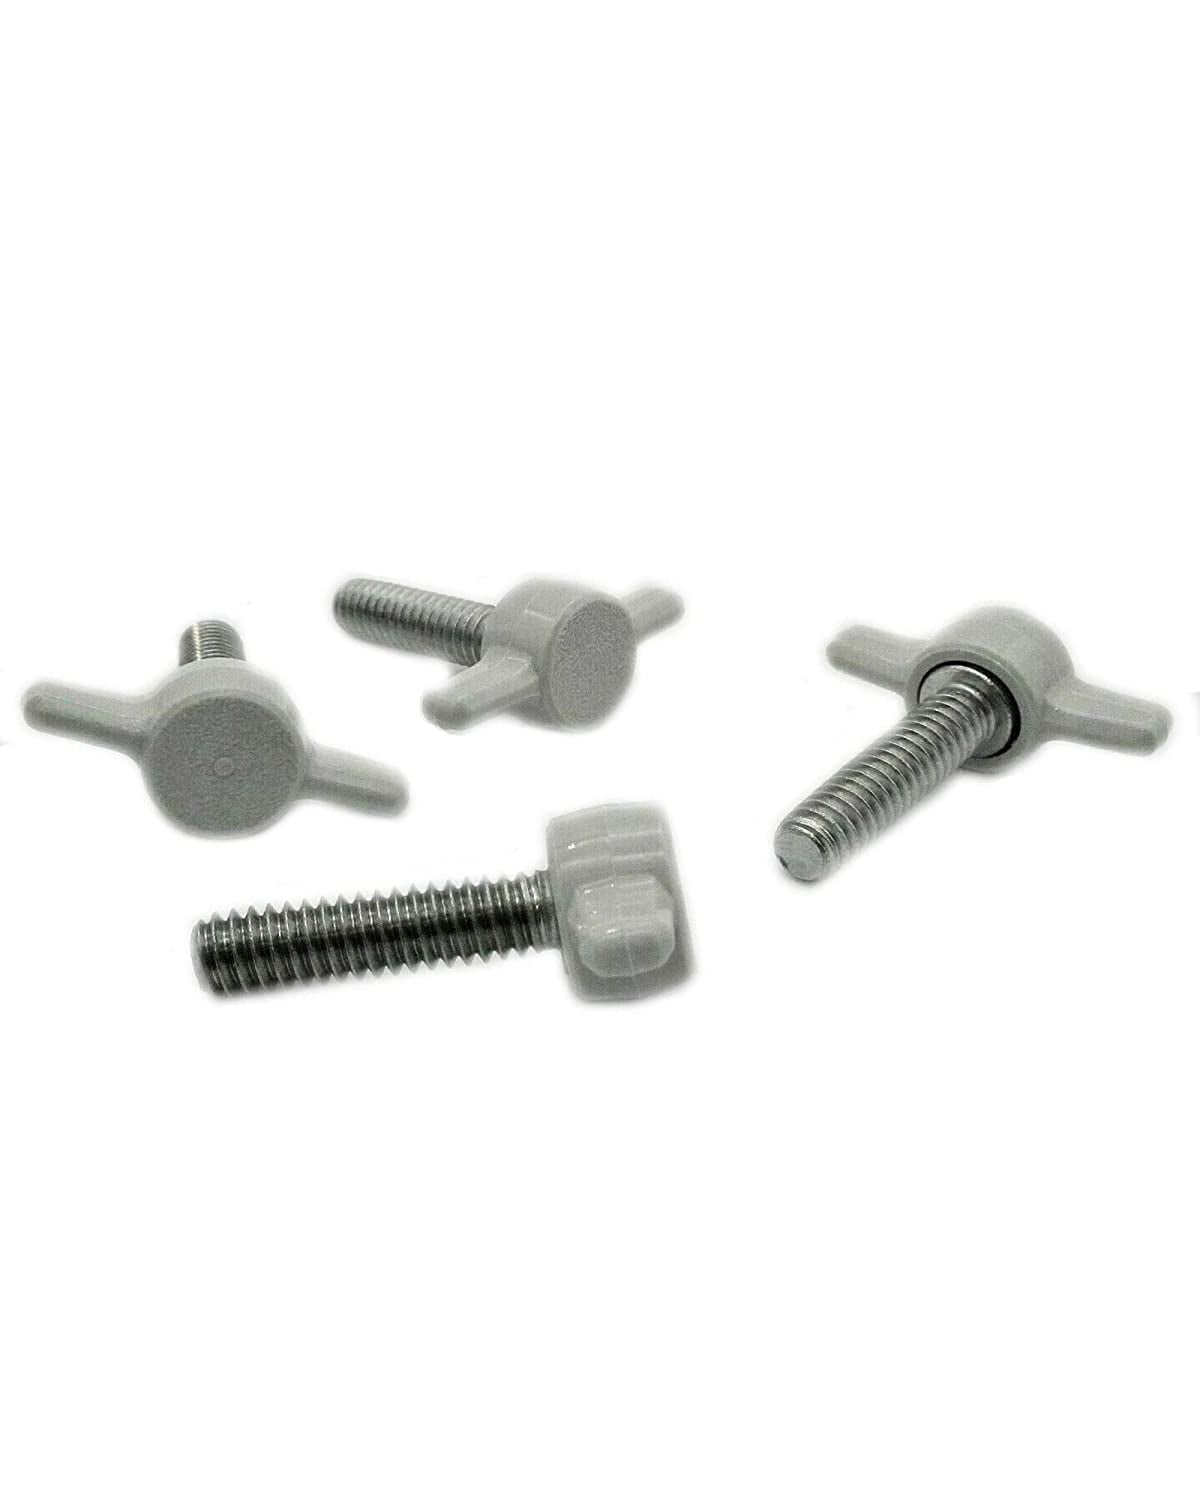 8 1/4-20 x 1-1/2 Thumb Screws with Tee/Wing Butterfly Thumb Screws 